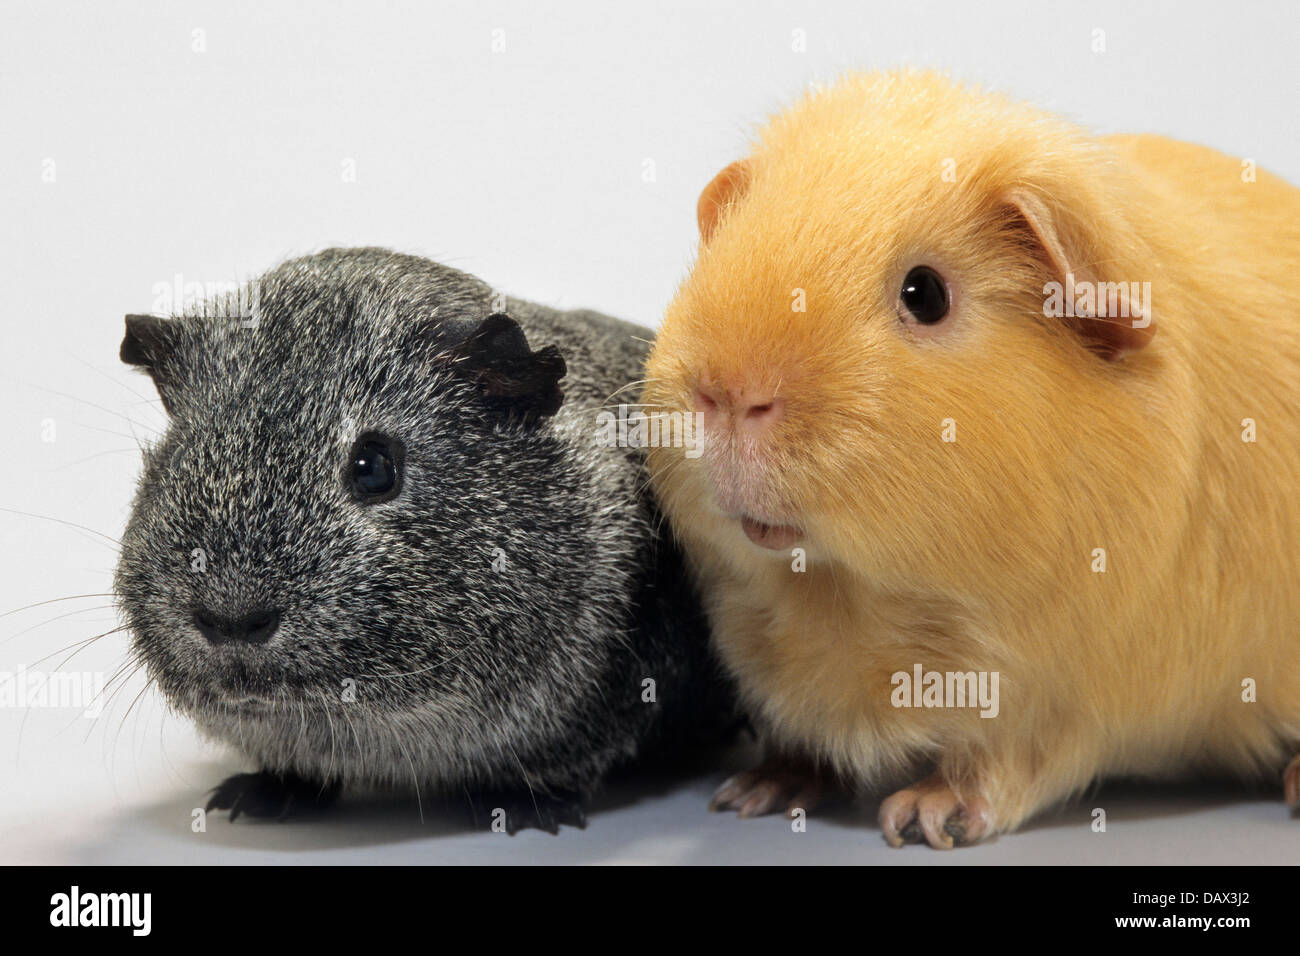 Portrait of two cavies / guinea pigs (Cavia porcellus), golden cavy and black guinea pig on white background Stock Photo